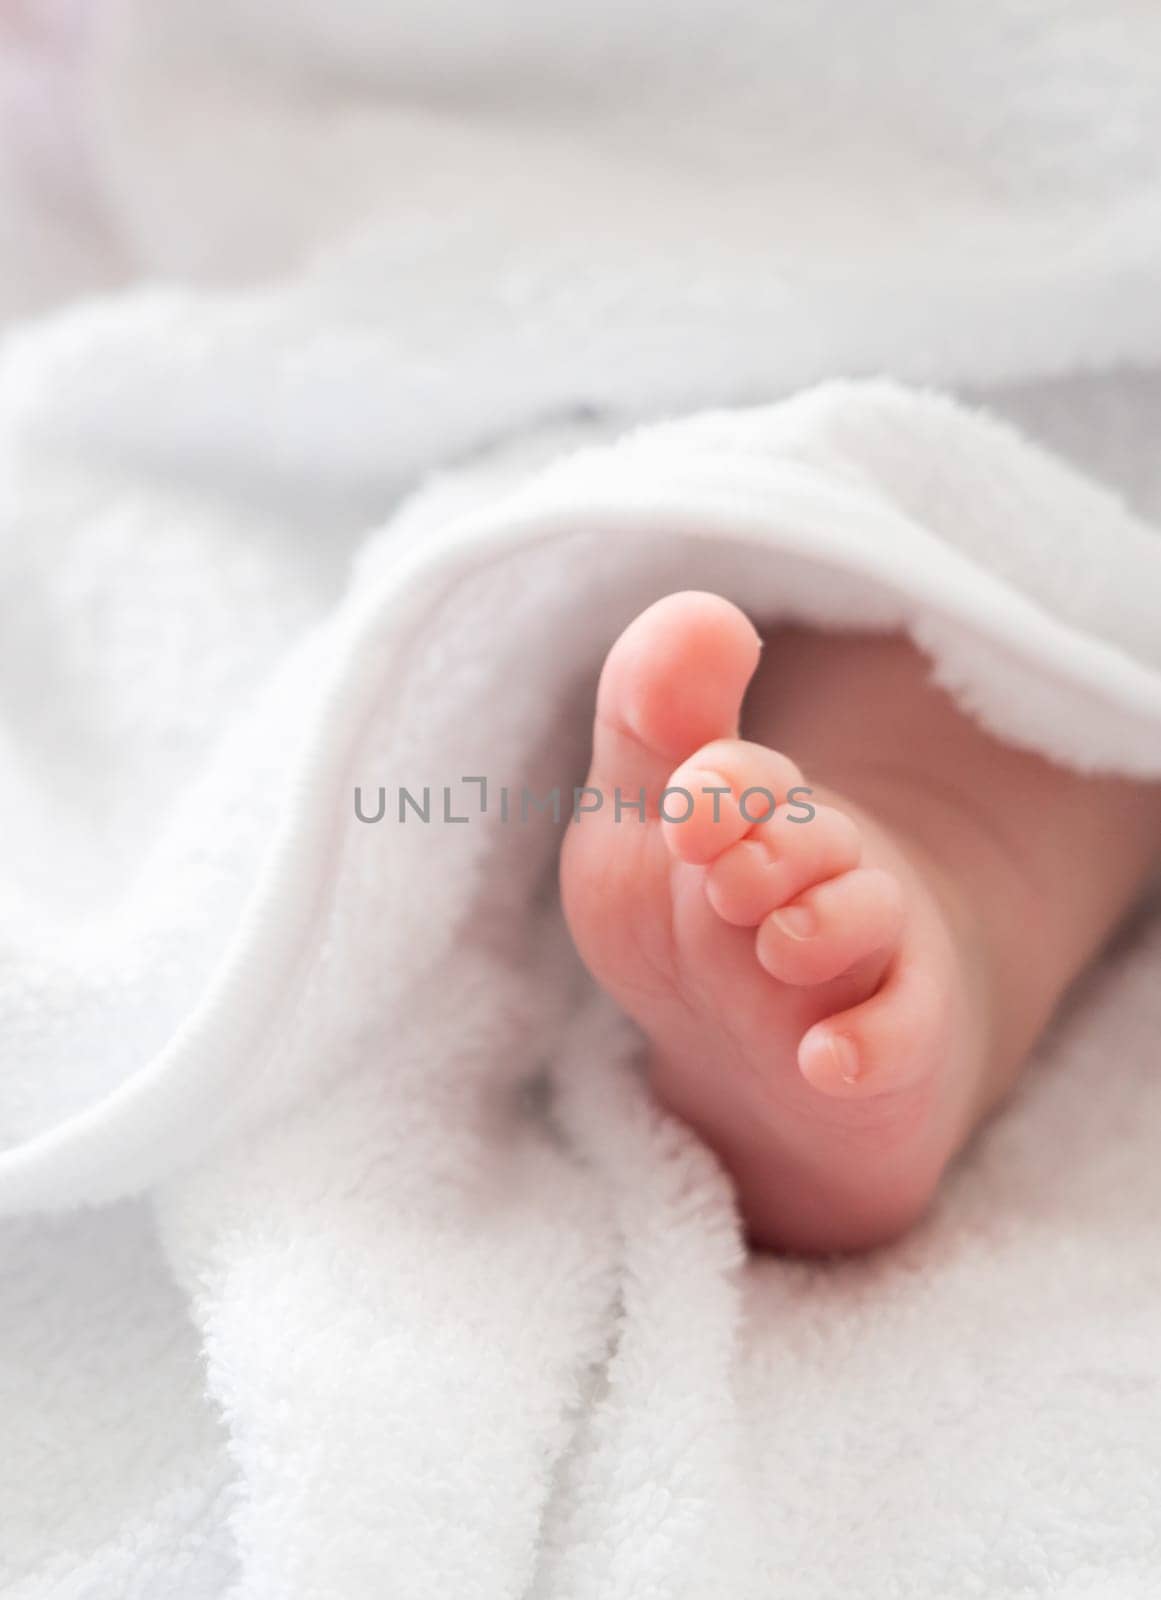 A heartwarming image showcasing the fragile foot of a newborn, subtly revealed from beneath a comforting white towel